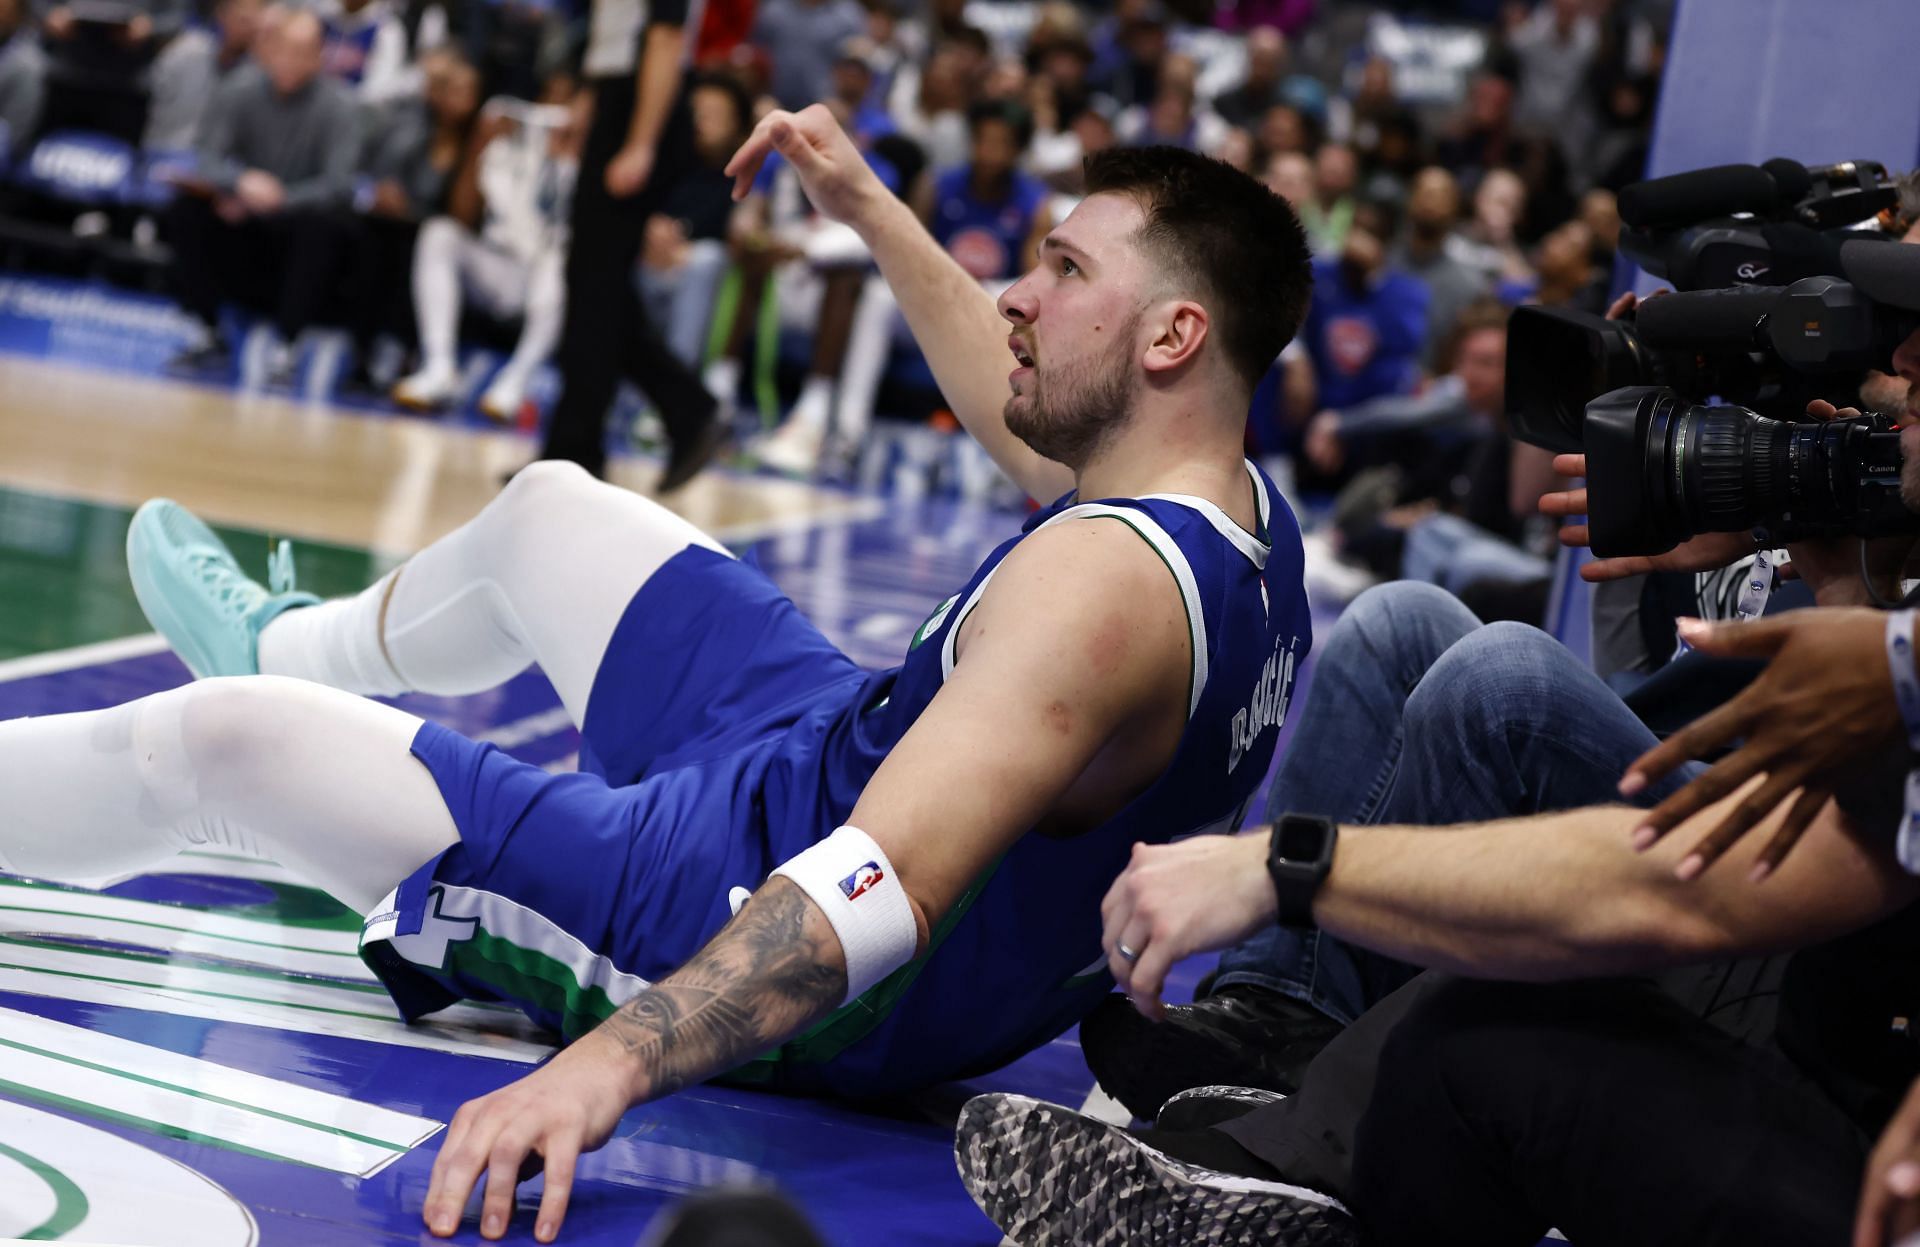 The Dallas Mavericks could be exacting too much out of Luka Doncic just to get into the playoffs.